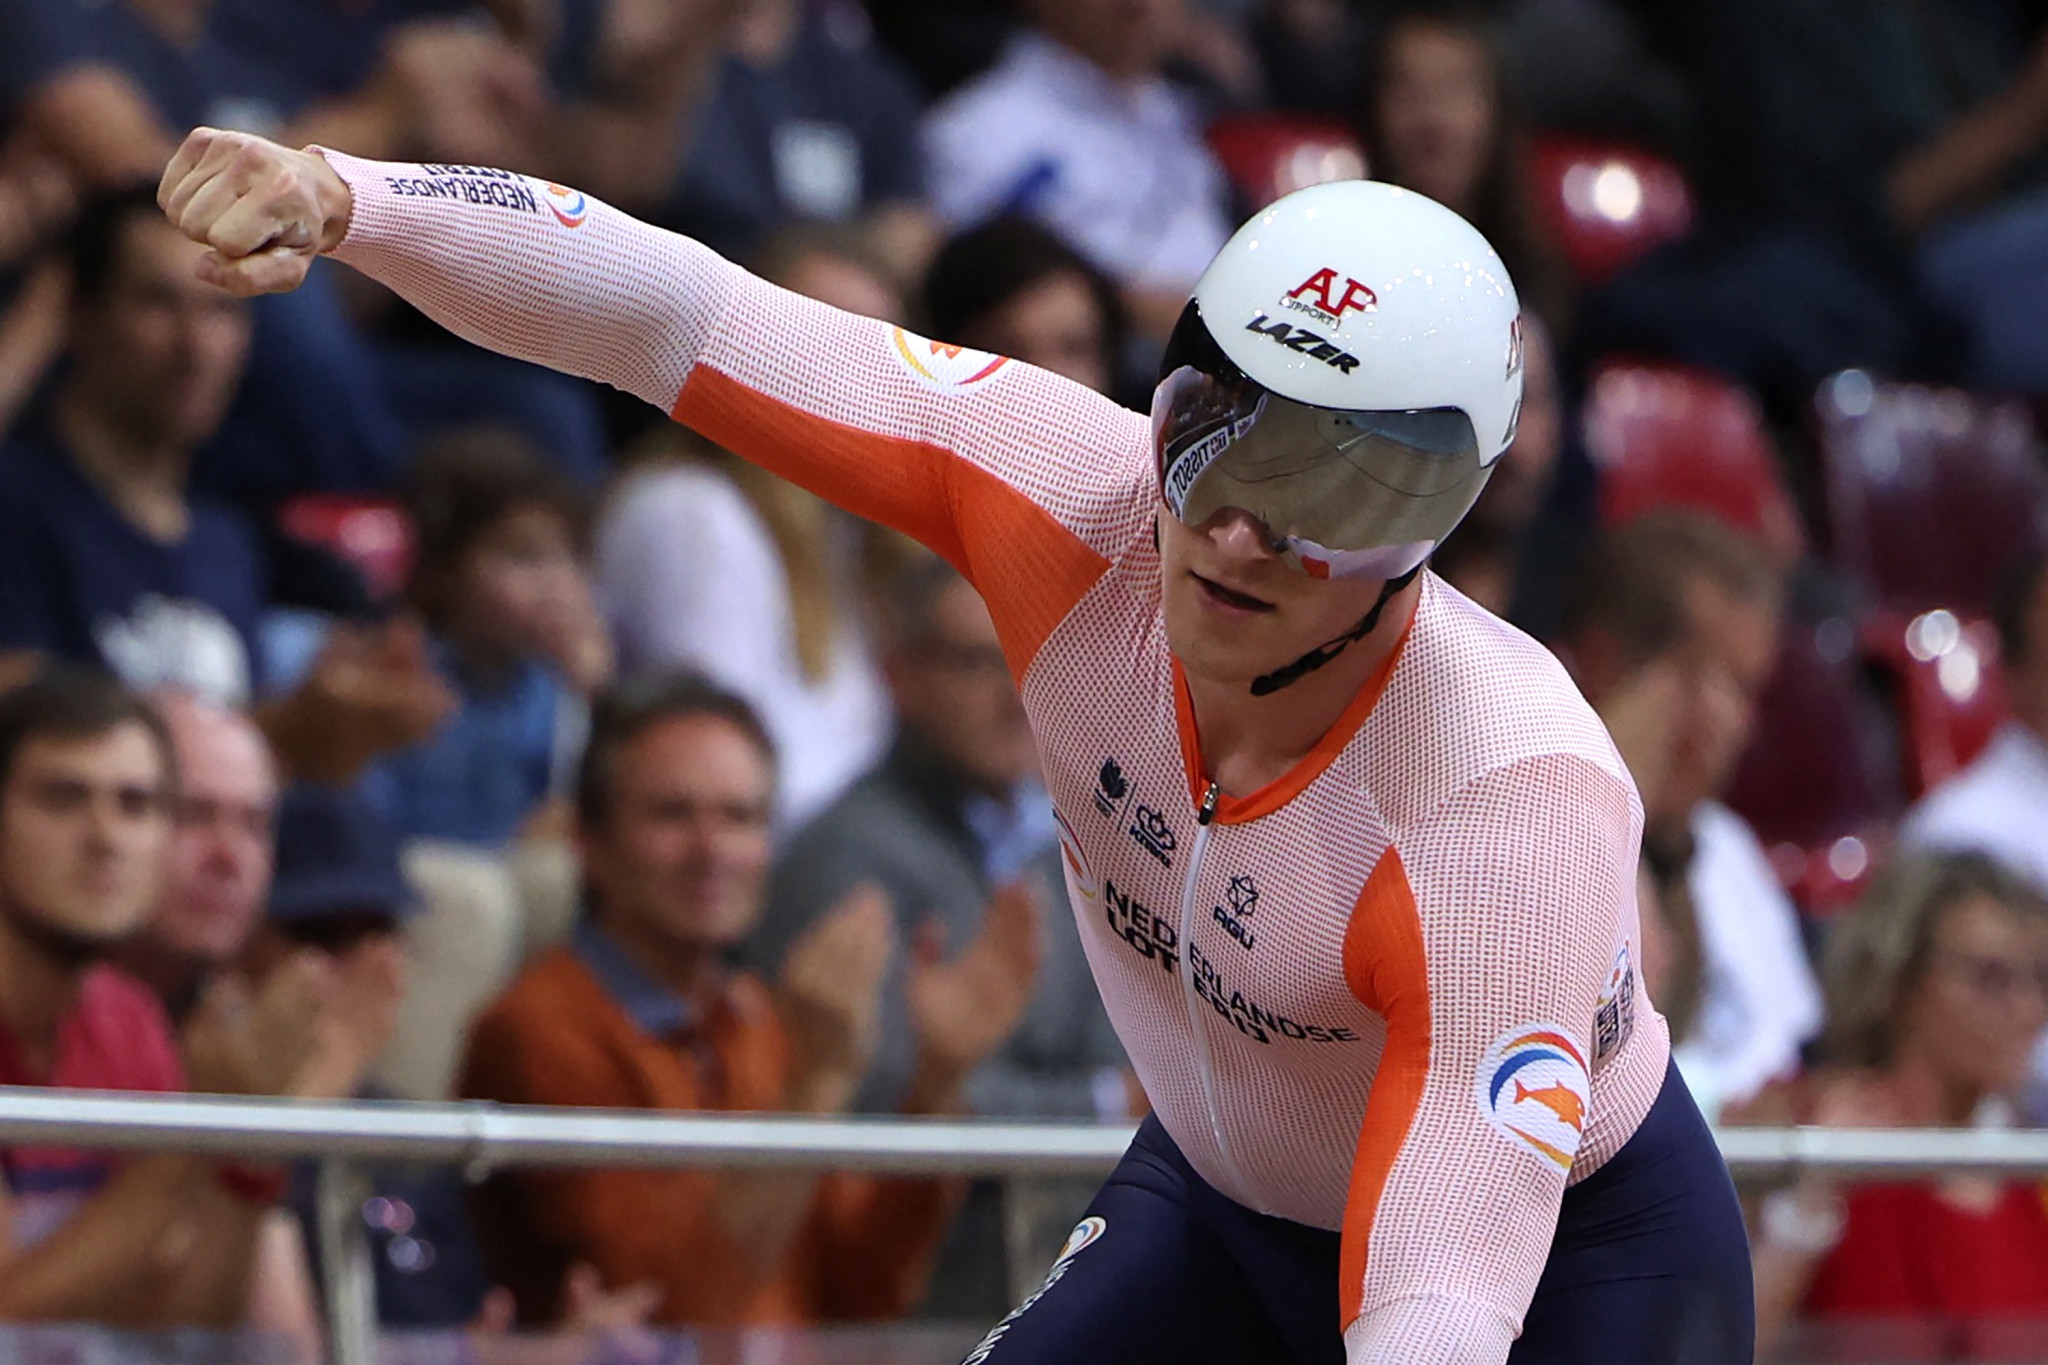 Jeffrey Hoogland led the Dutch team to victory today ©Getty Images